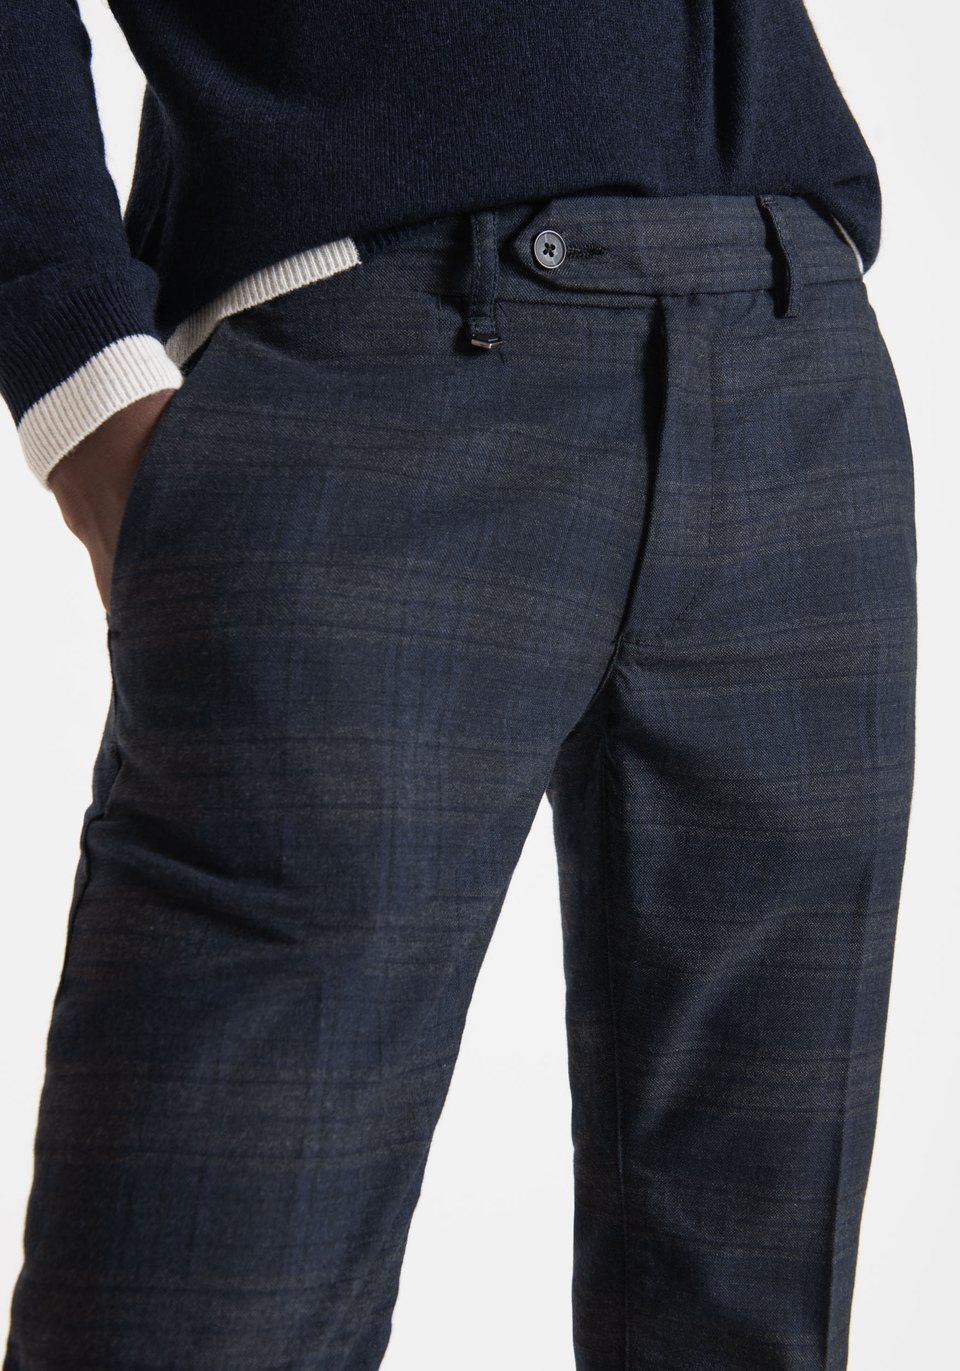 SKINNY-FIT "BRYAN" TROUSERS IN A STRETCHY FABRIC WITH A CHECK PATTERN - Antony Morato Online Shop